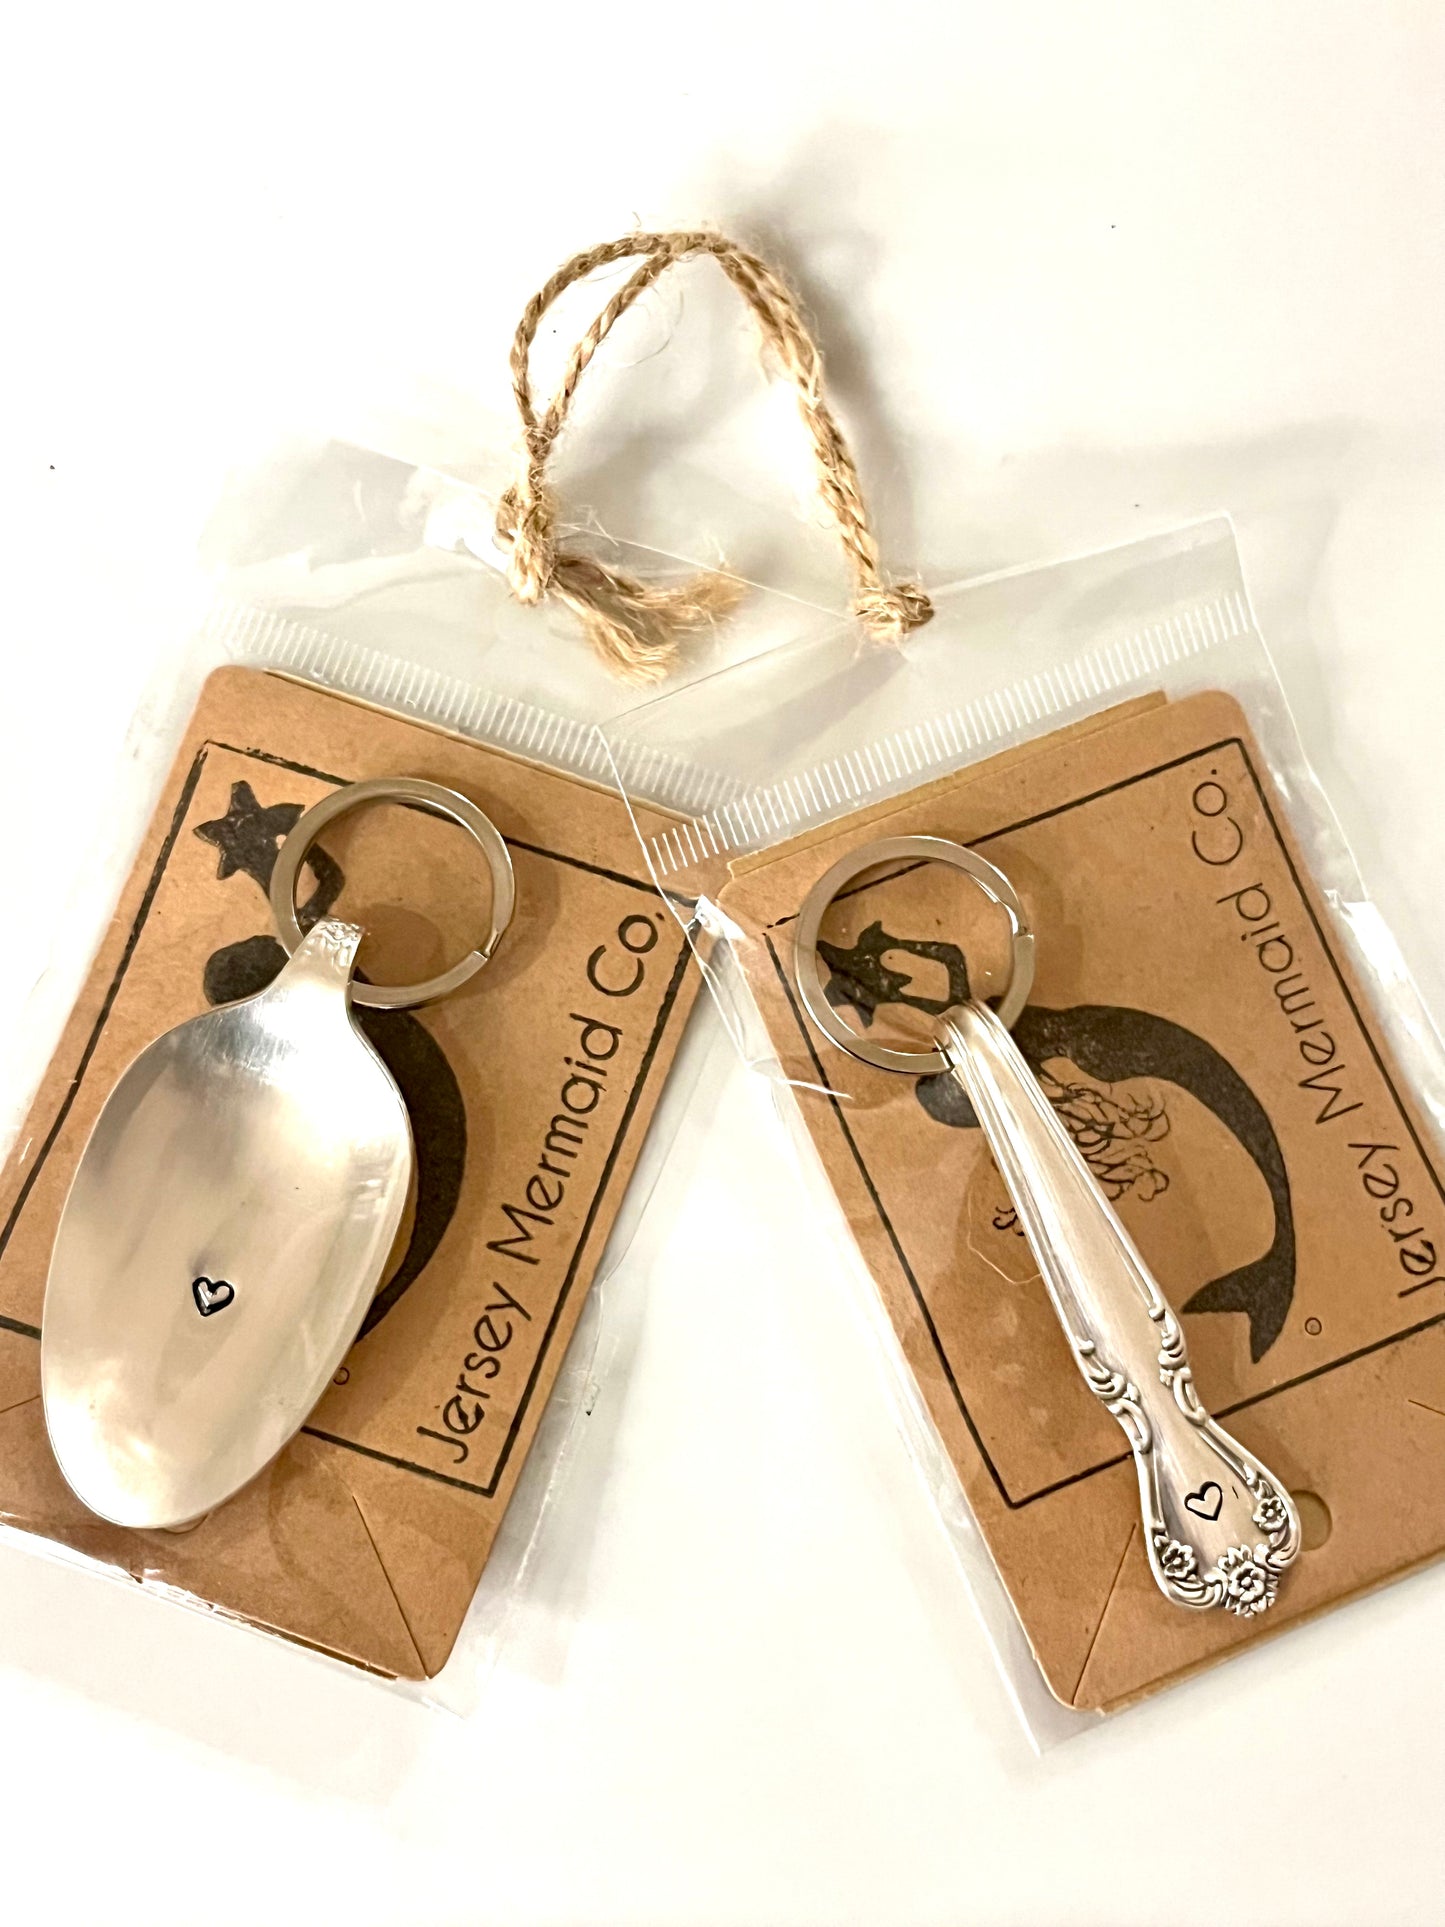 "A Serving of Love" - keychains